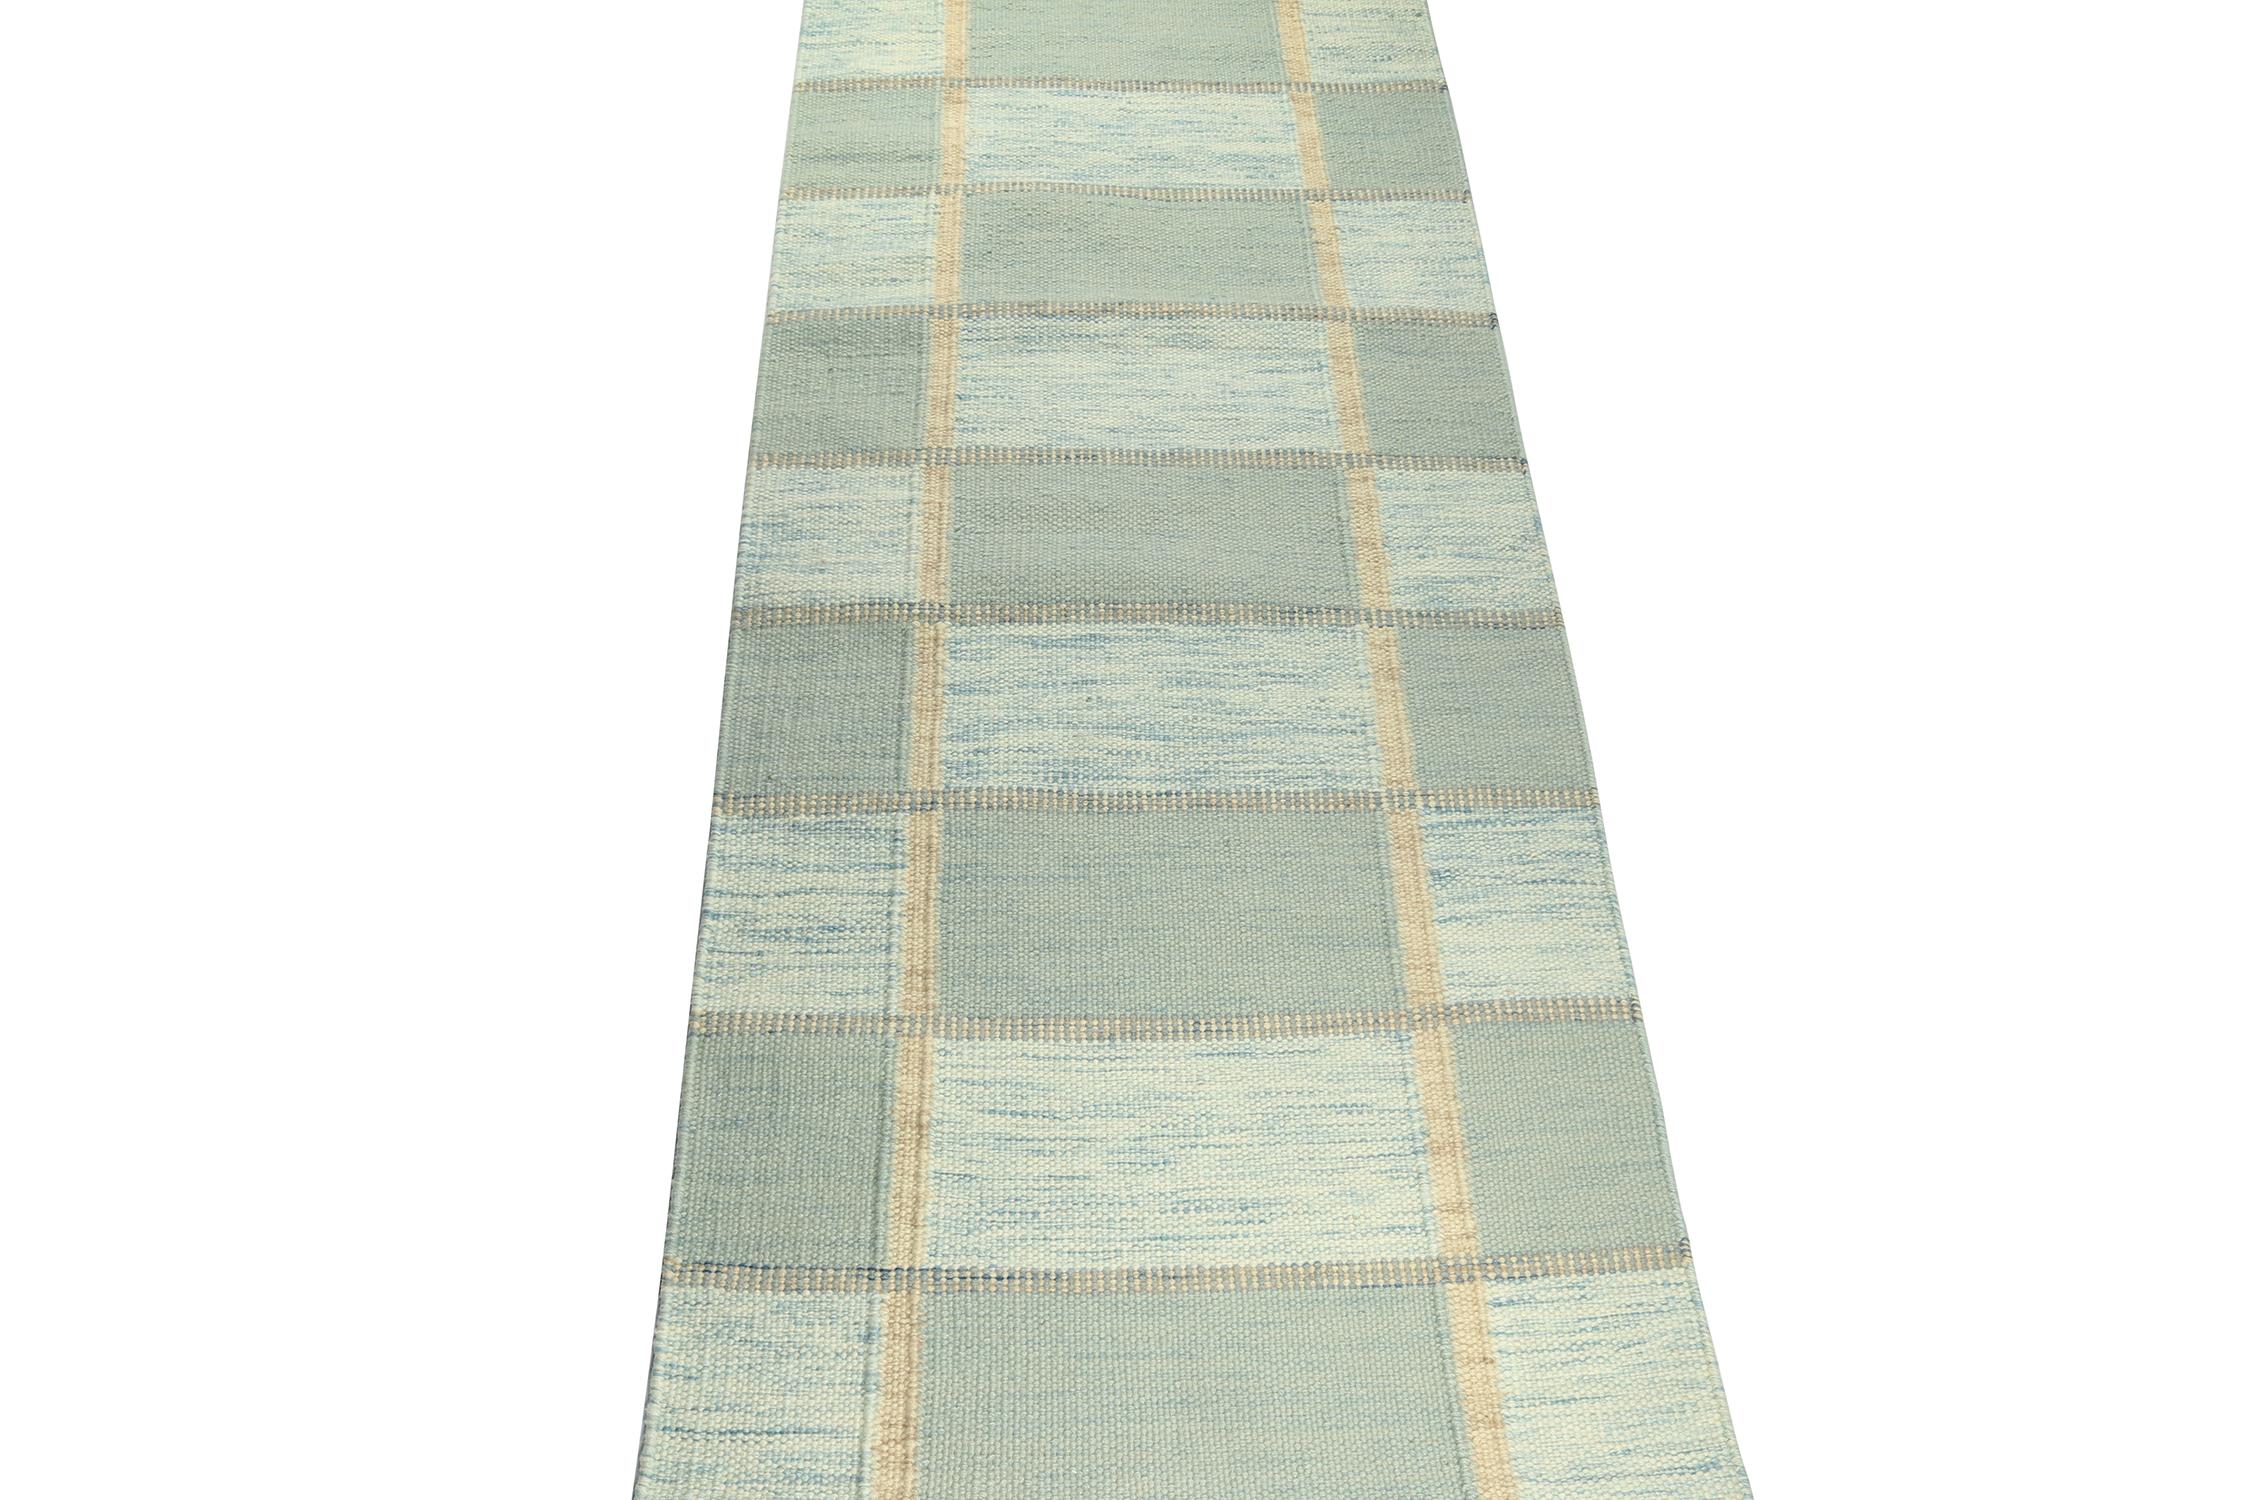 A smart 3x7 Swedish style kilim runner from our award-winning Scandinavian flat weave collection. Handwoven in wool. 
Further On the Design: 
This runner enjoys a simple presence with geometric patterns in seafoam blue & green with beige accents.